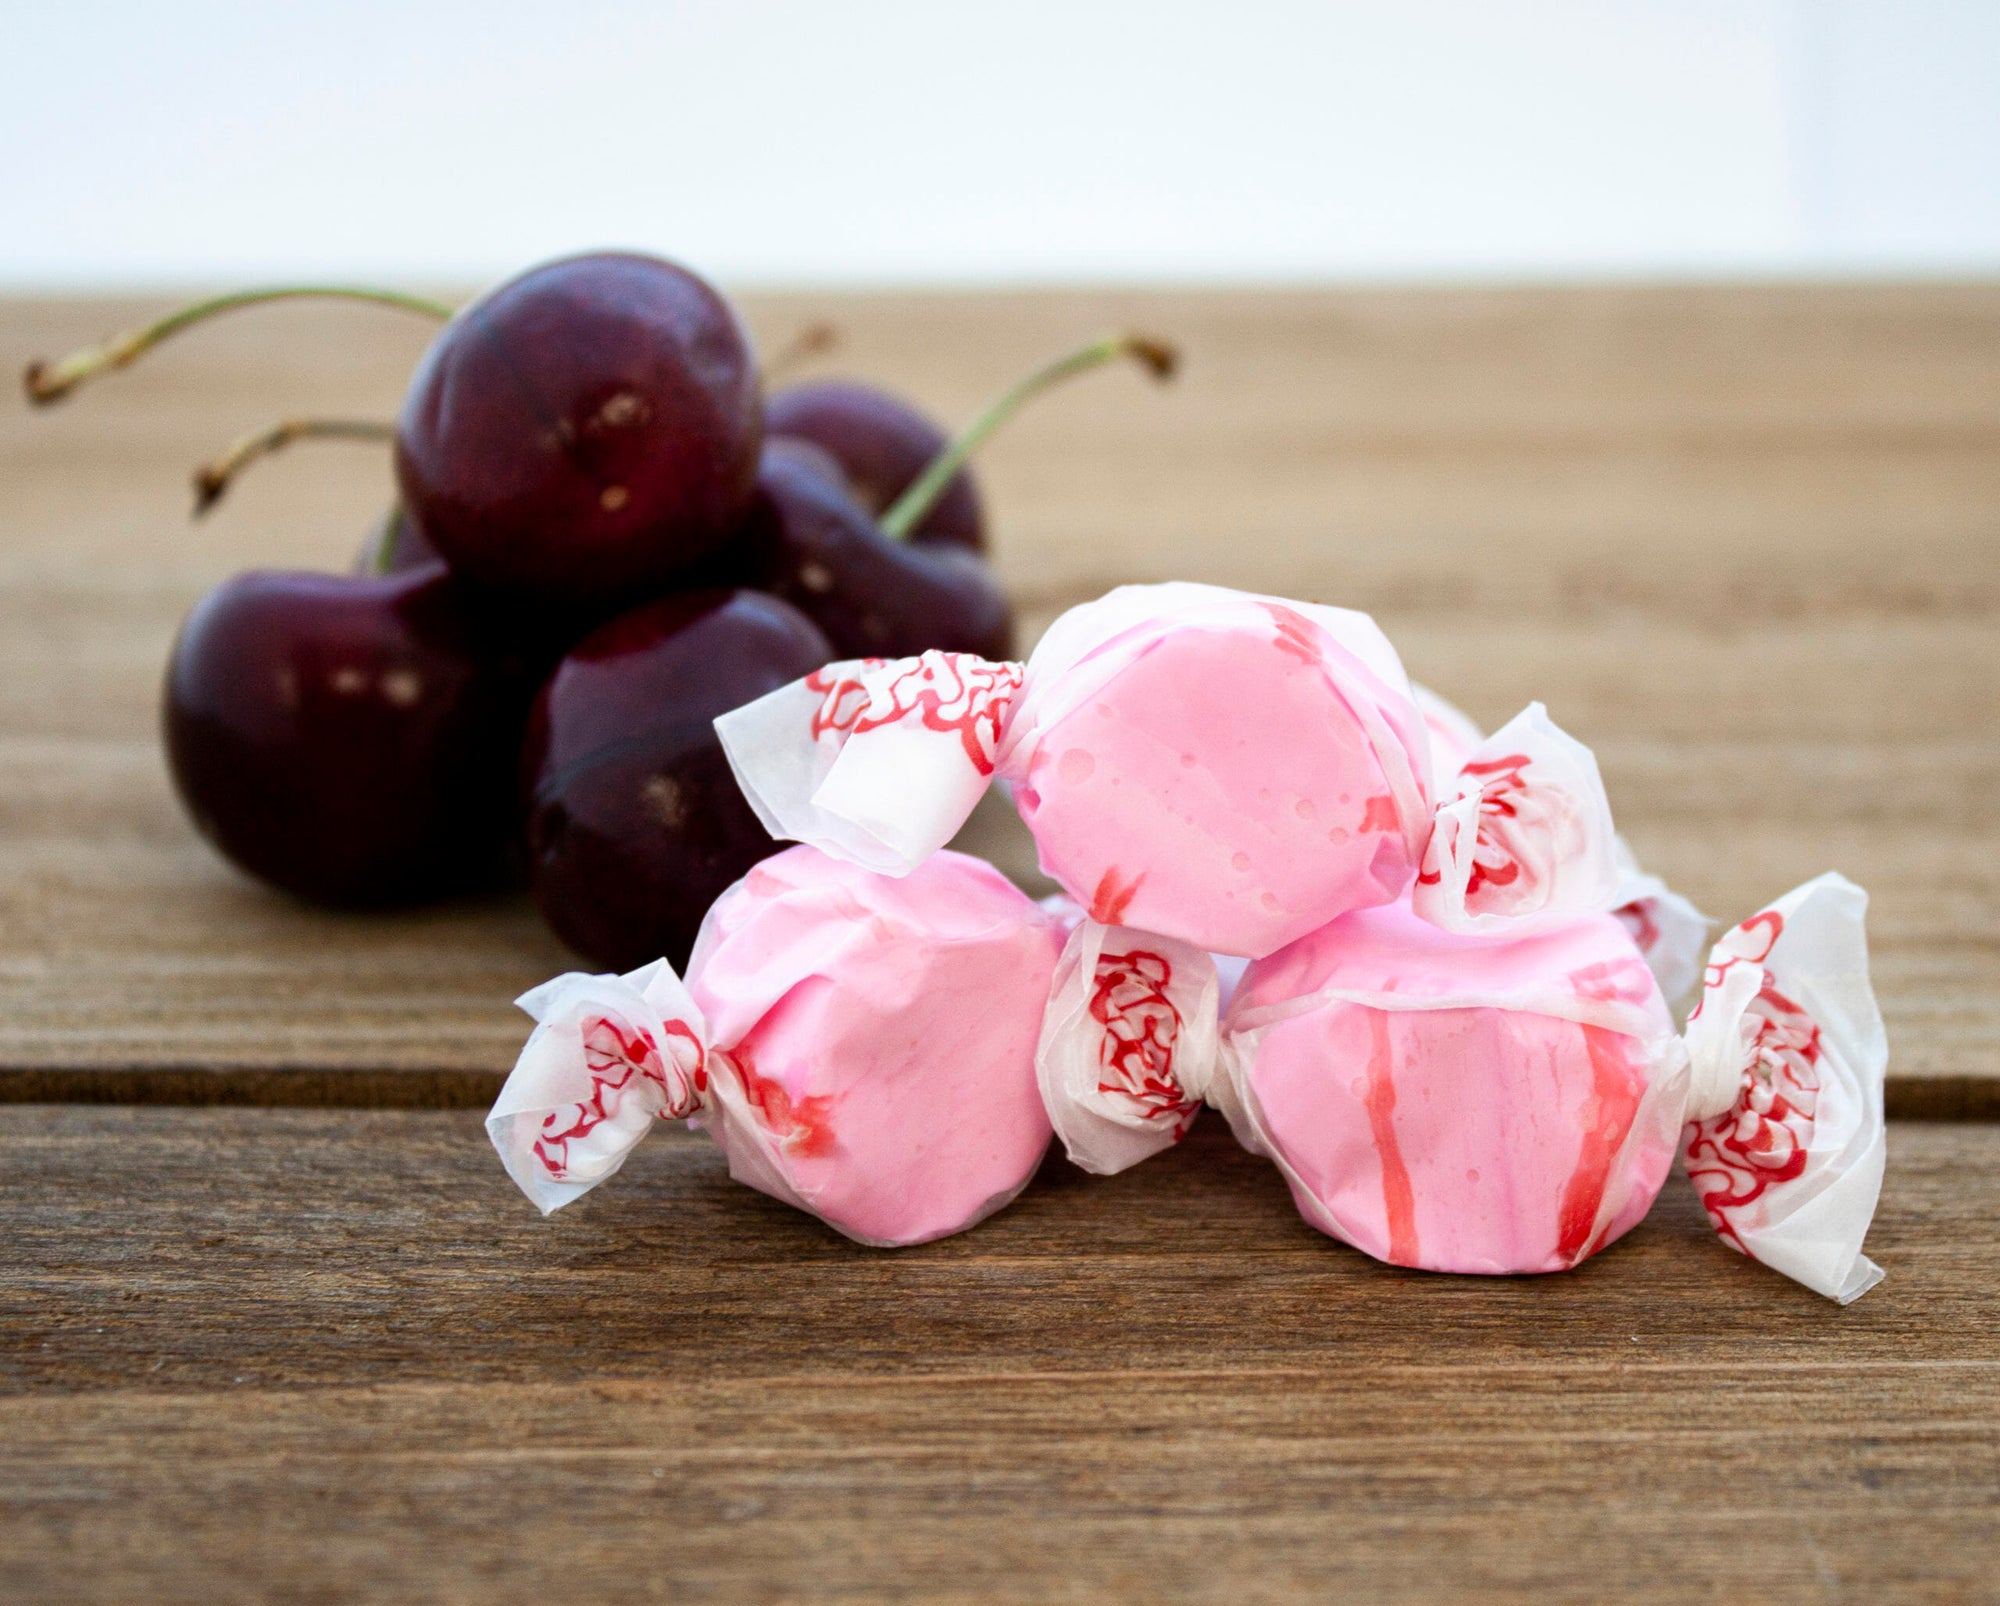 Cherry Taffy - February Flavor of the Month